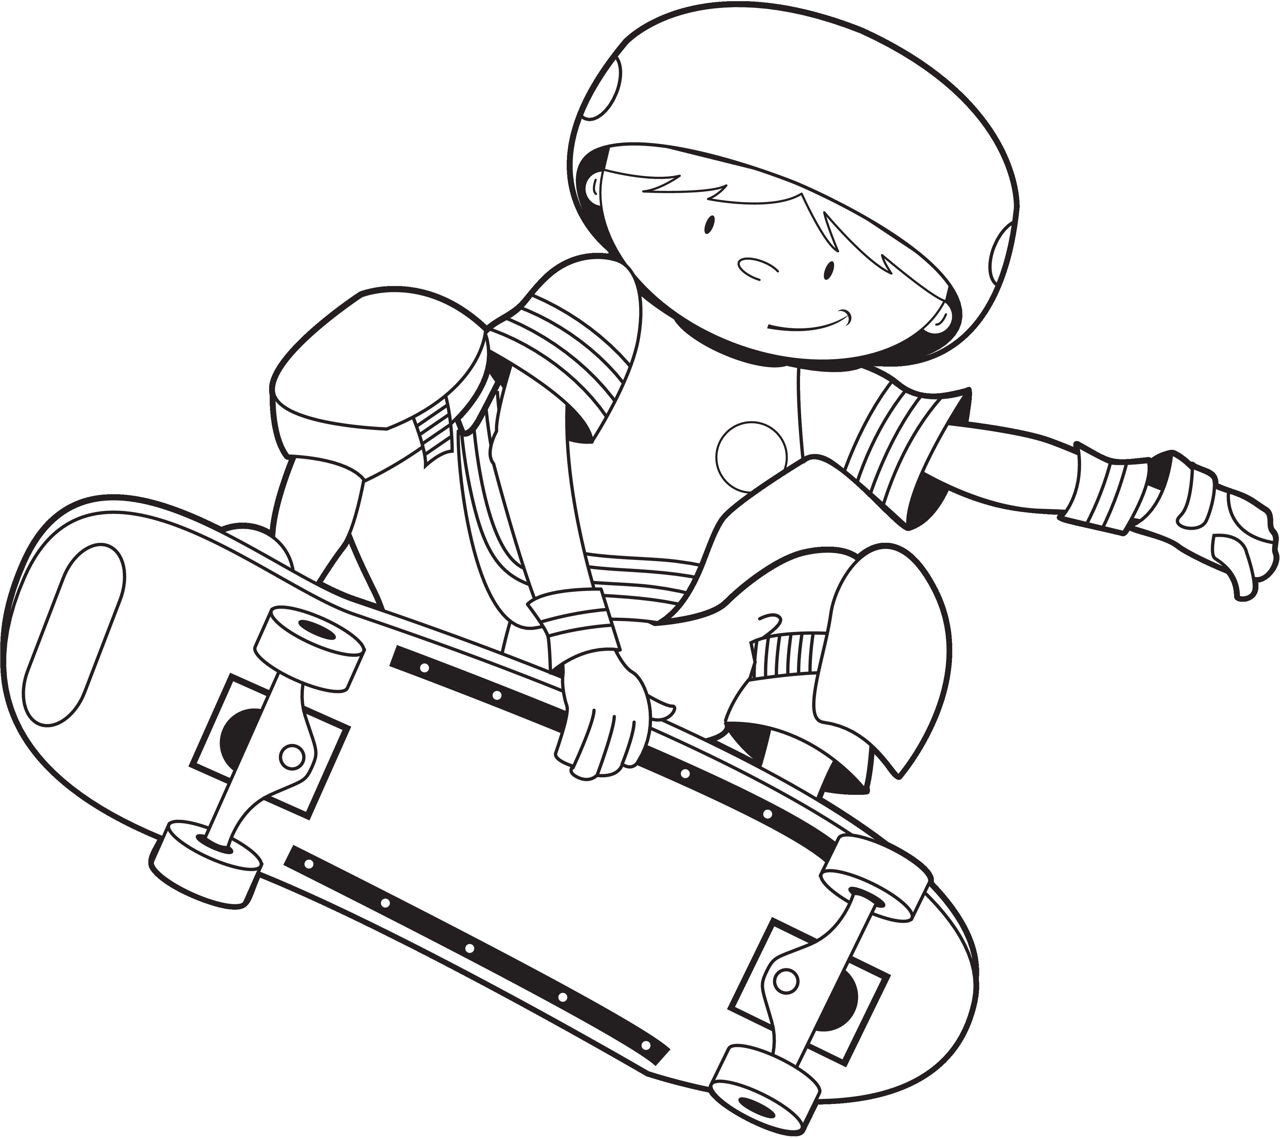 Cool Coloring Pages For Boys
 10 Cool Coloring Pages for Boys to Print Out For Free